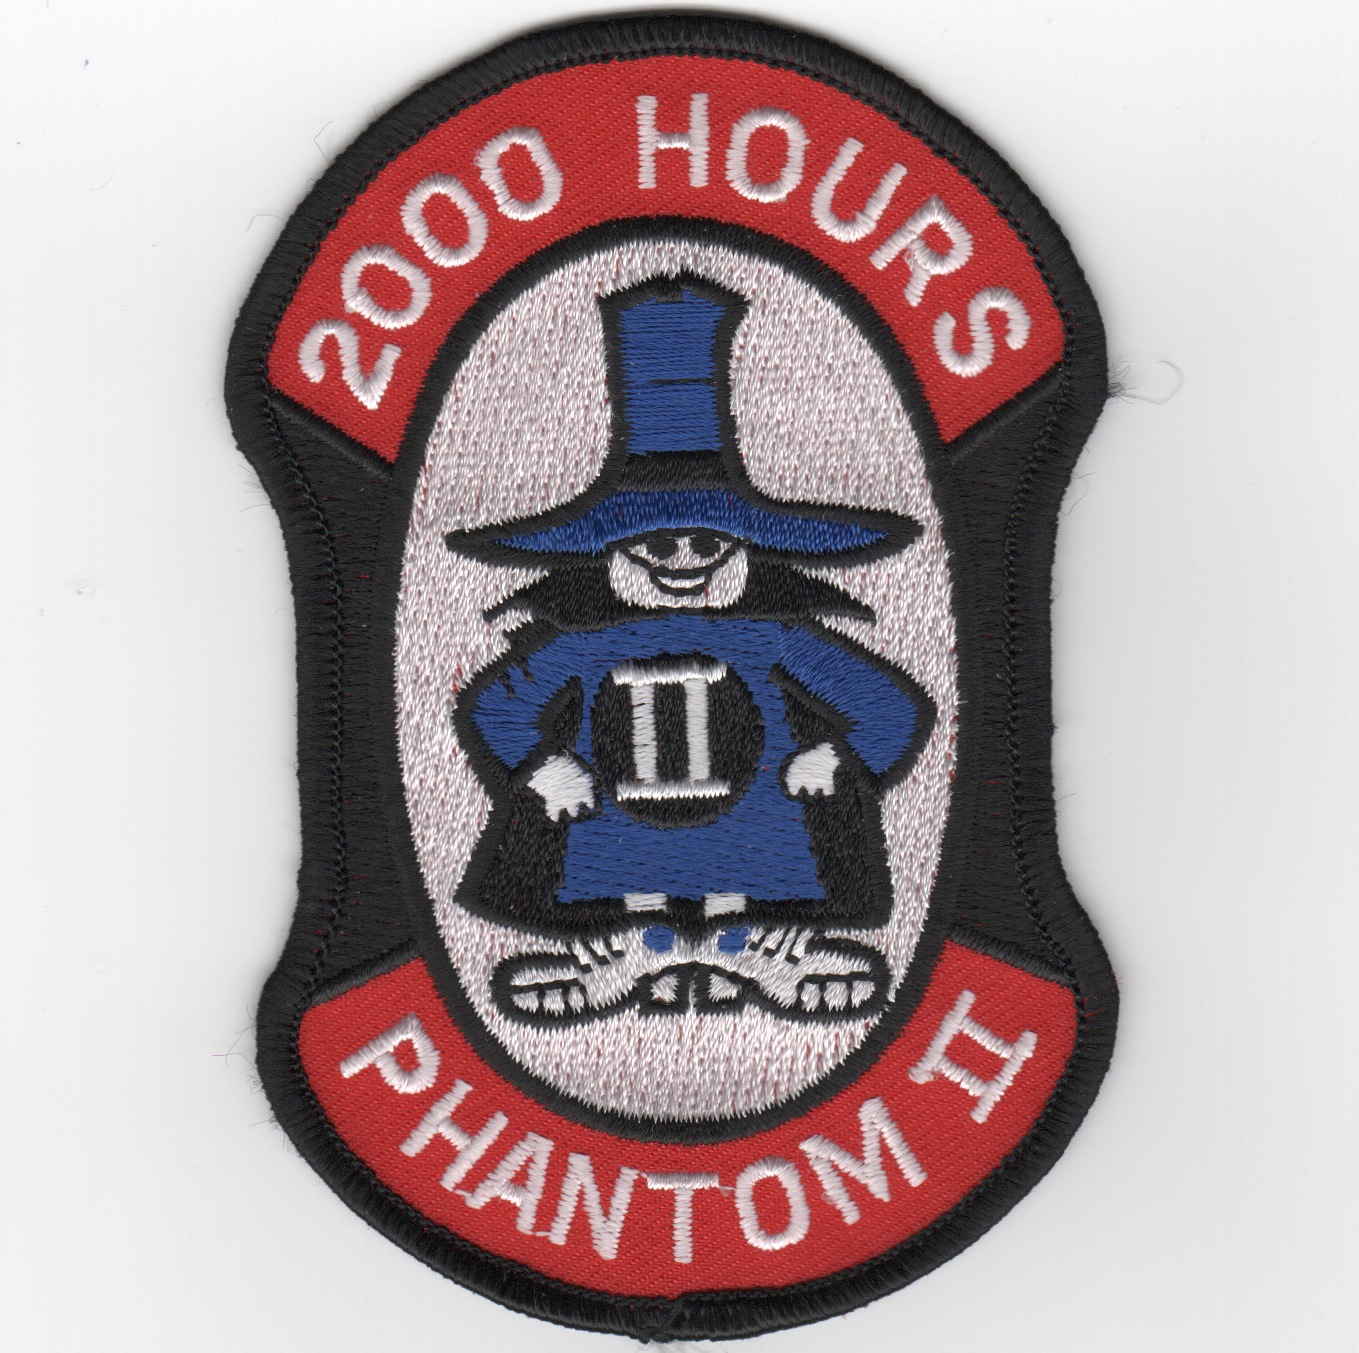 F-4 '2000 Hours' Patch